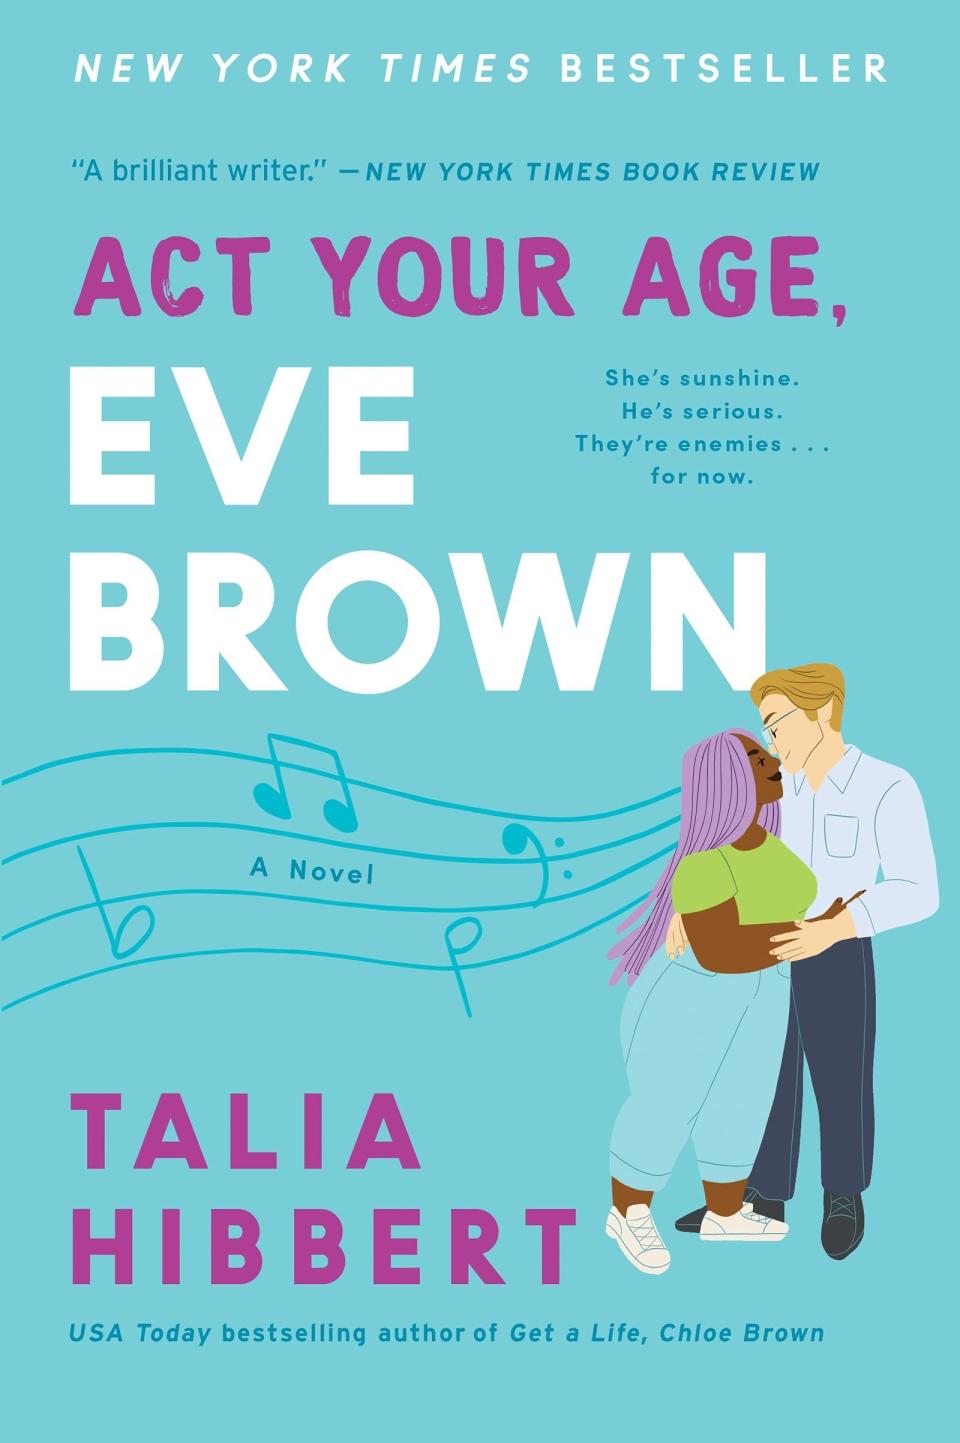 In the final book of Talia Hibbert's beloved Brown Sisters series, we meet the chaotic, purple-haired, sunshine in tornado form Eve Brown as she sunshine-spins her way into Jacob's bed and breakfast (and life). Jacob is icy, serious, and means business. He tries to resist her charms at first, but there's no denying their magnetic pull to each other — a strong force which may also be the reason Eve accidentally hits him with her car. Oops! Get it from Bookshop or a local bookstore through Indiebound here.